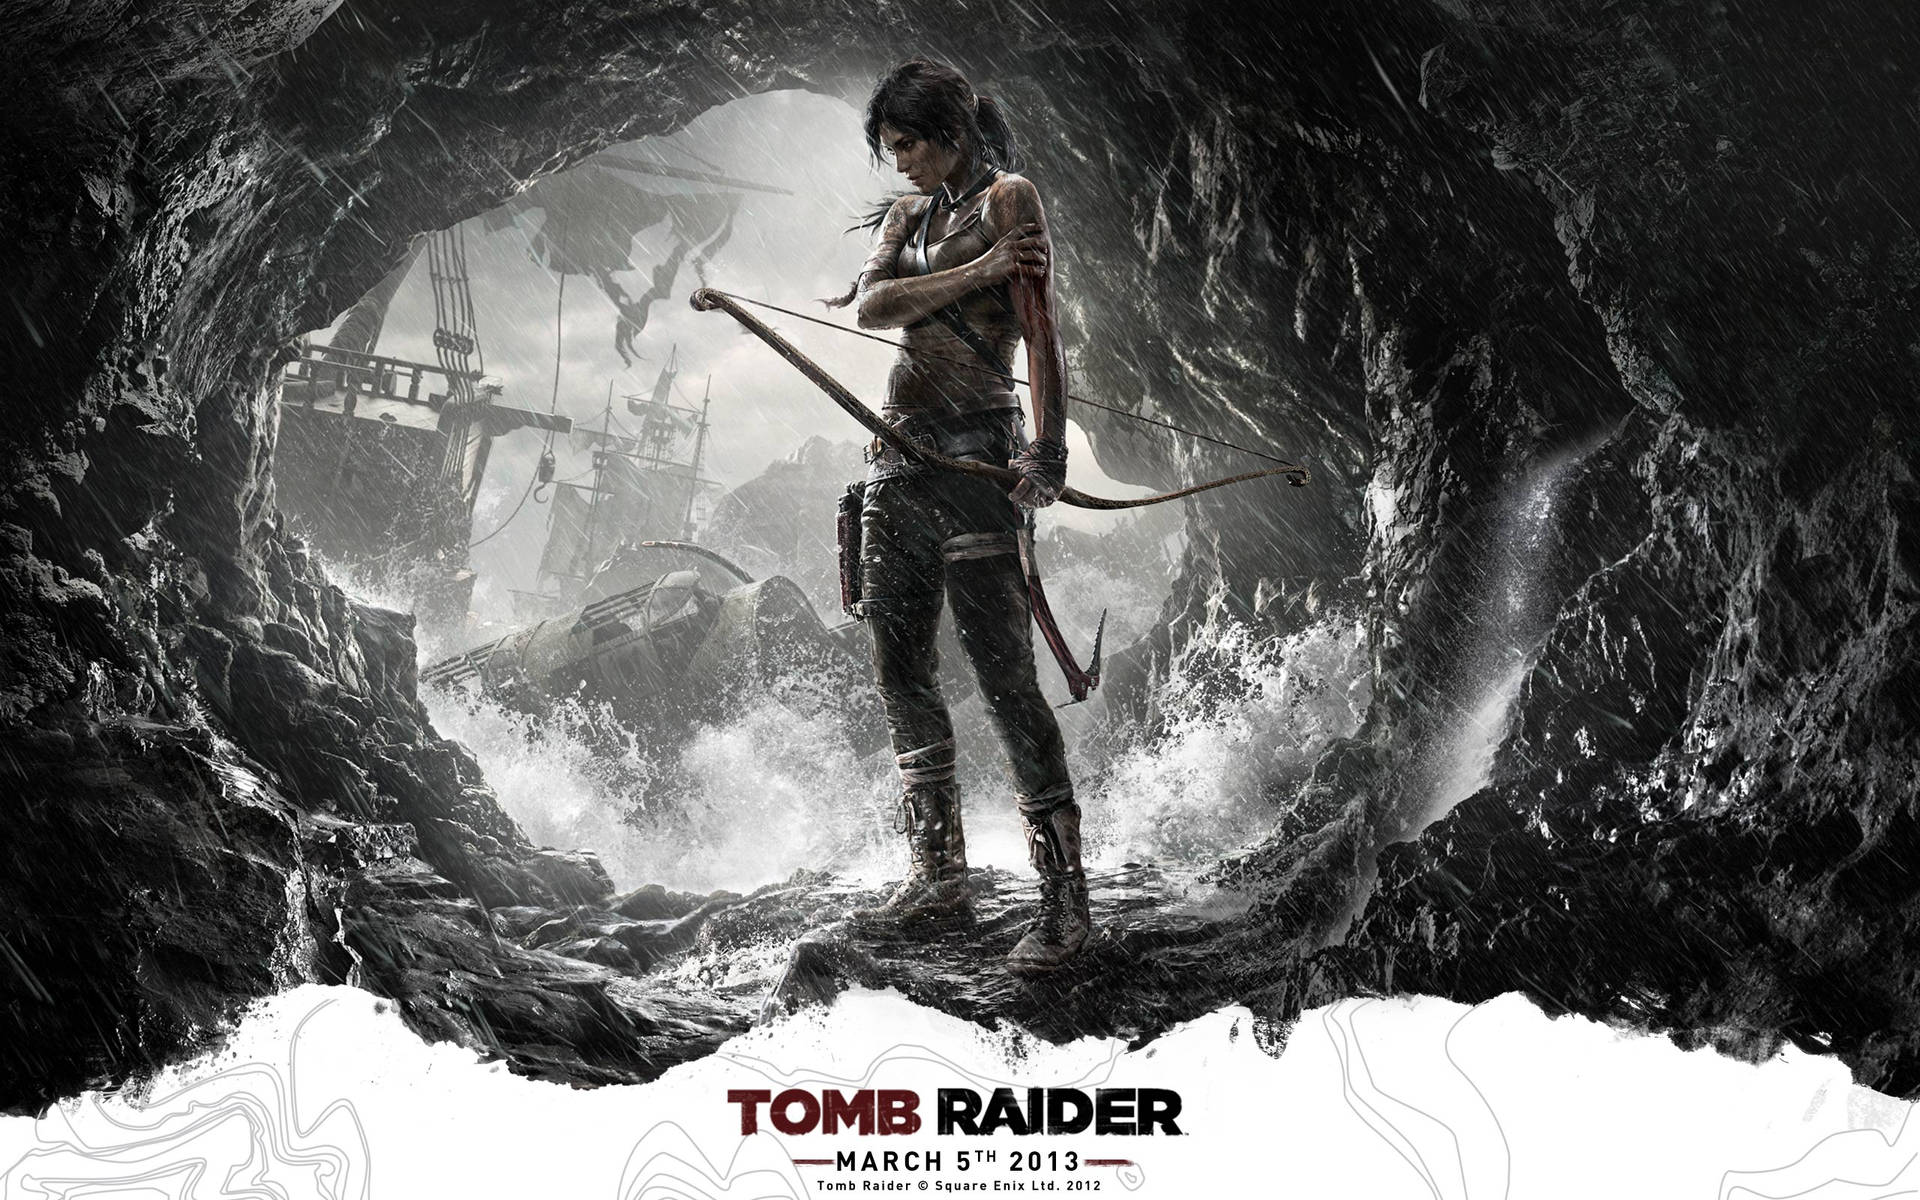 Tomb Raider 2013 Poster Hd Background